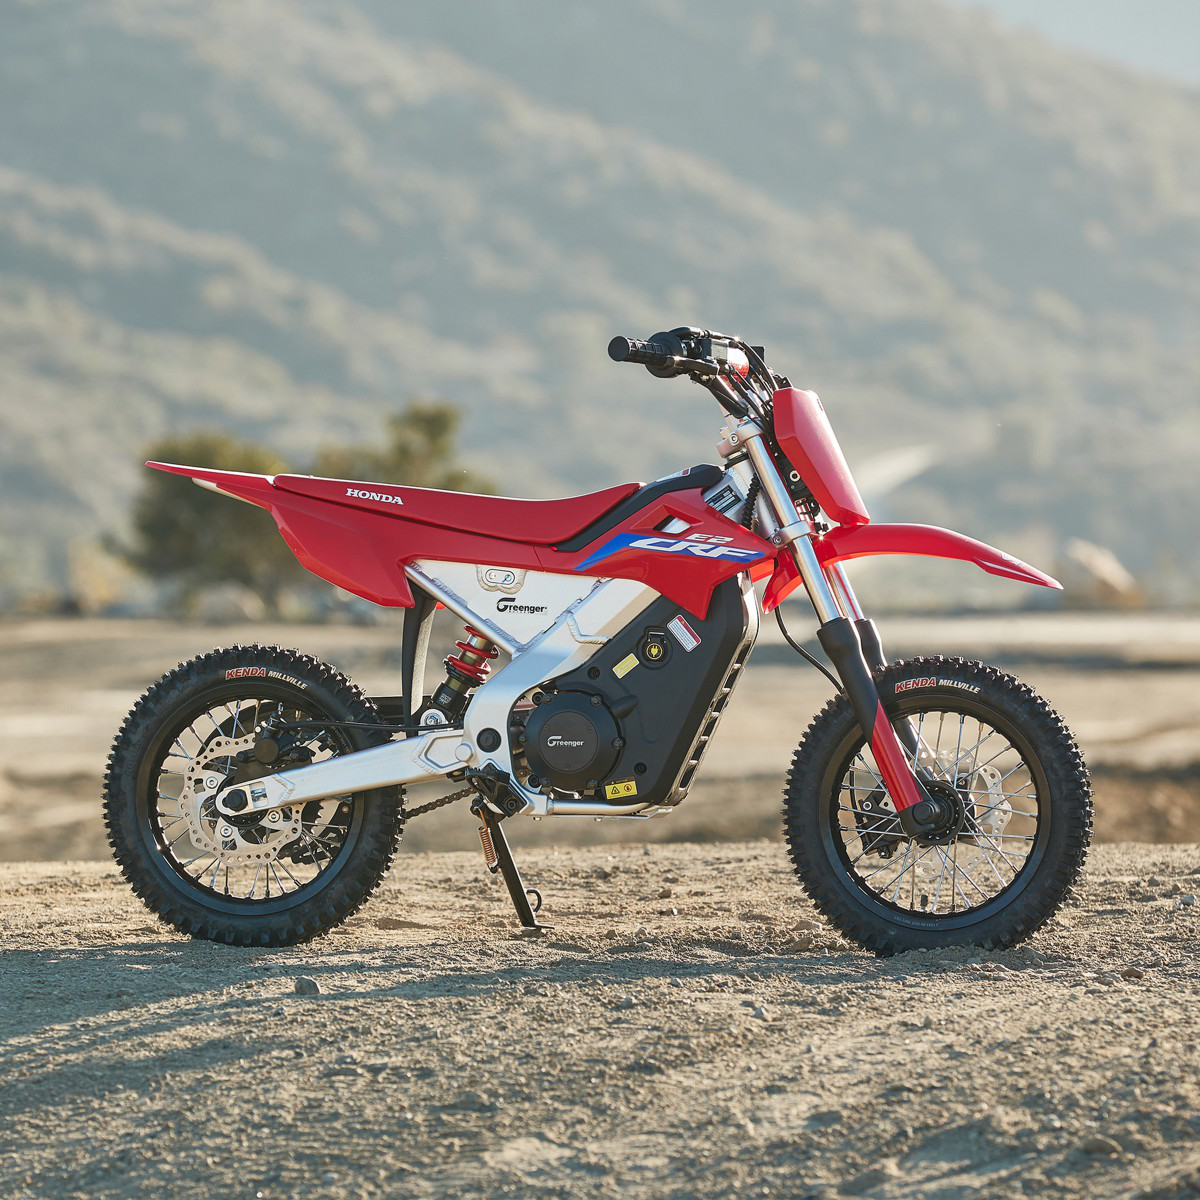 GREENGER ELETRIC TECHNOLOGY LLC wins Silver at the prestigious A' Vehicle, Mobility and Transportation Design Award with Crf-E2 Electric Dirtbike.